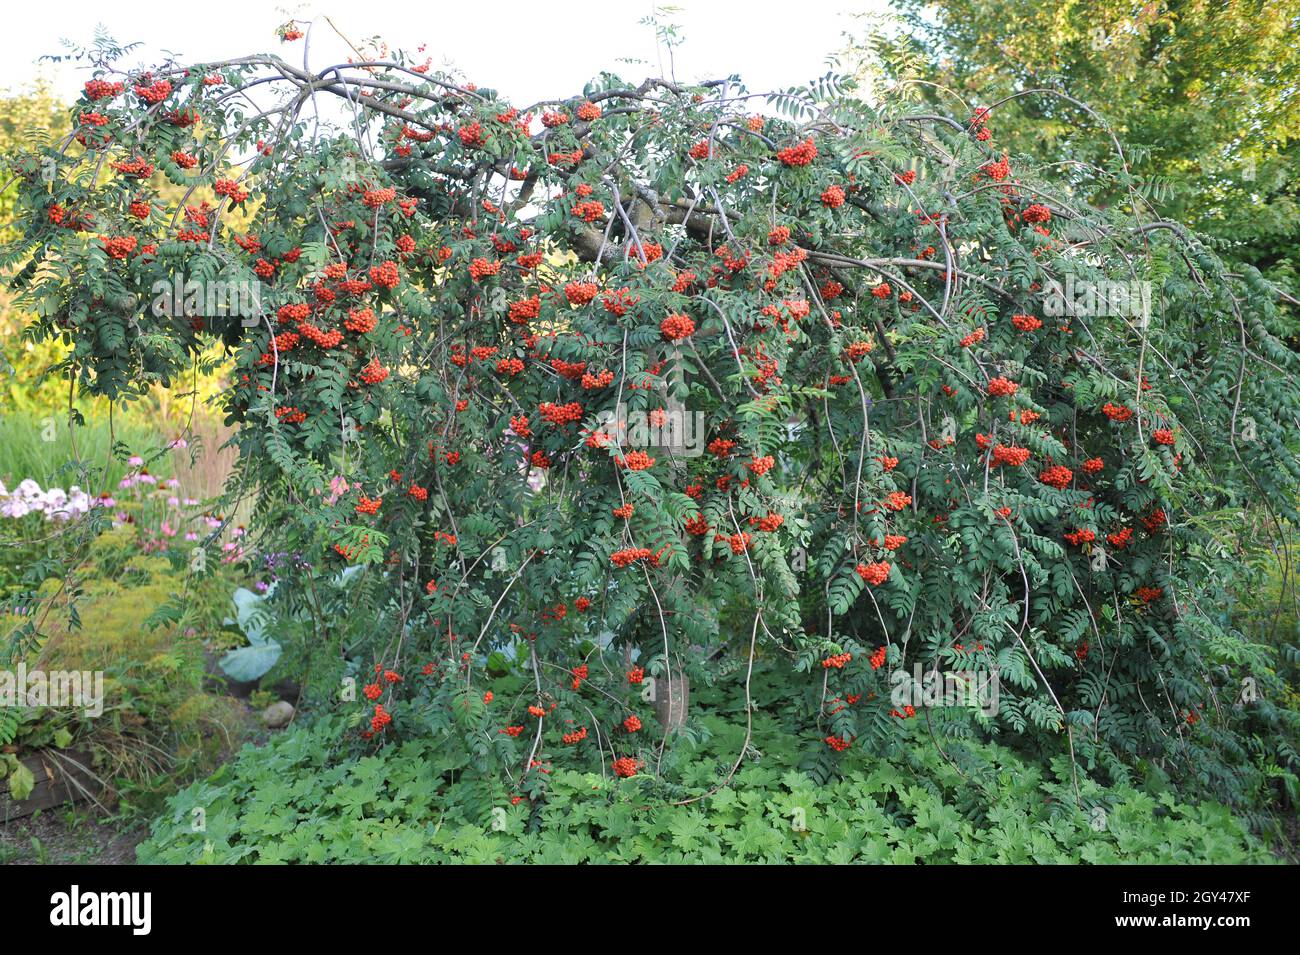 Weeping European mountain ash (Sorbus aucuparia Pendula) bears red fruits in a garden in August Stock Photo